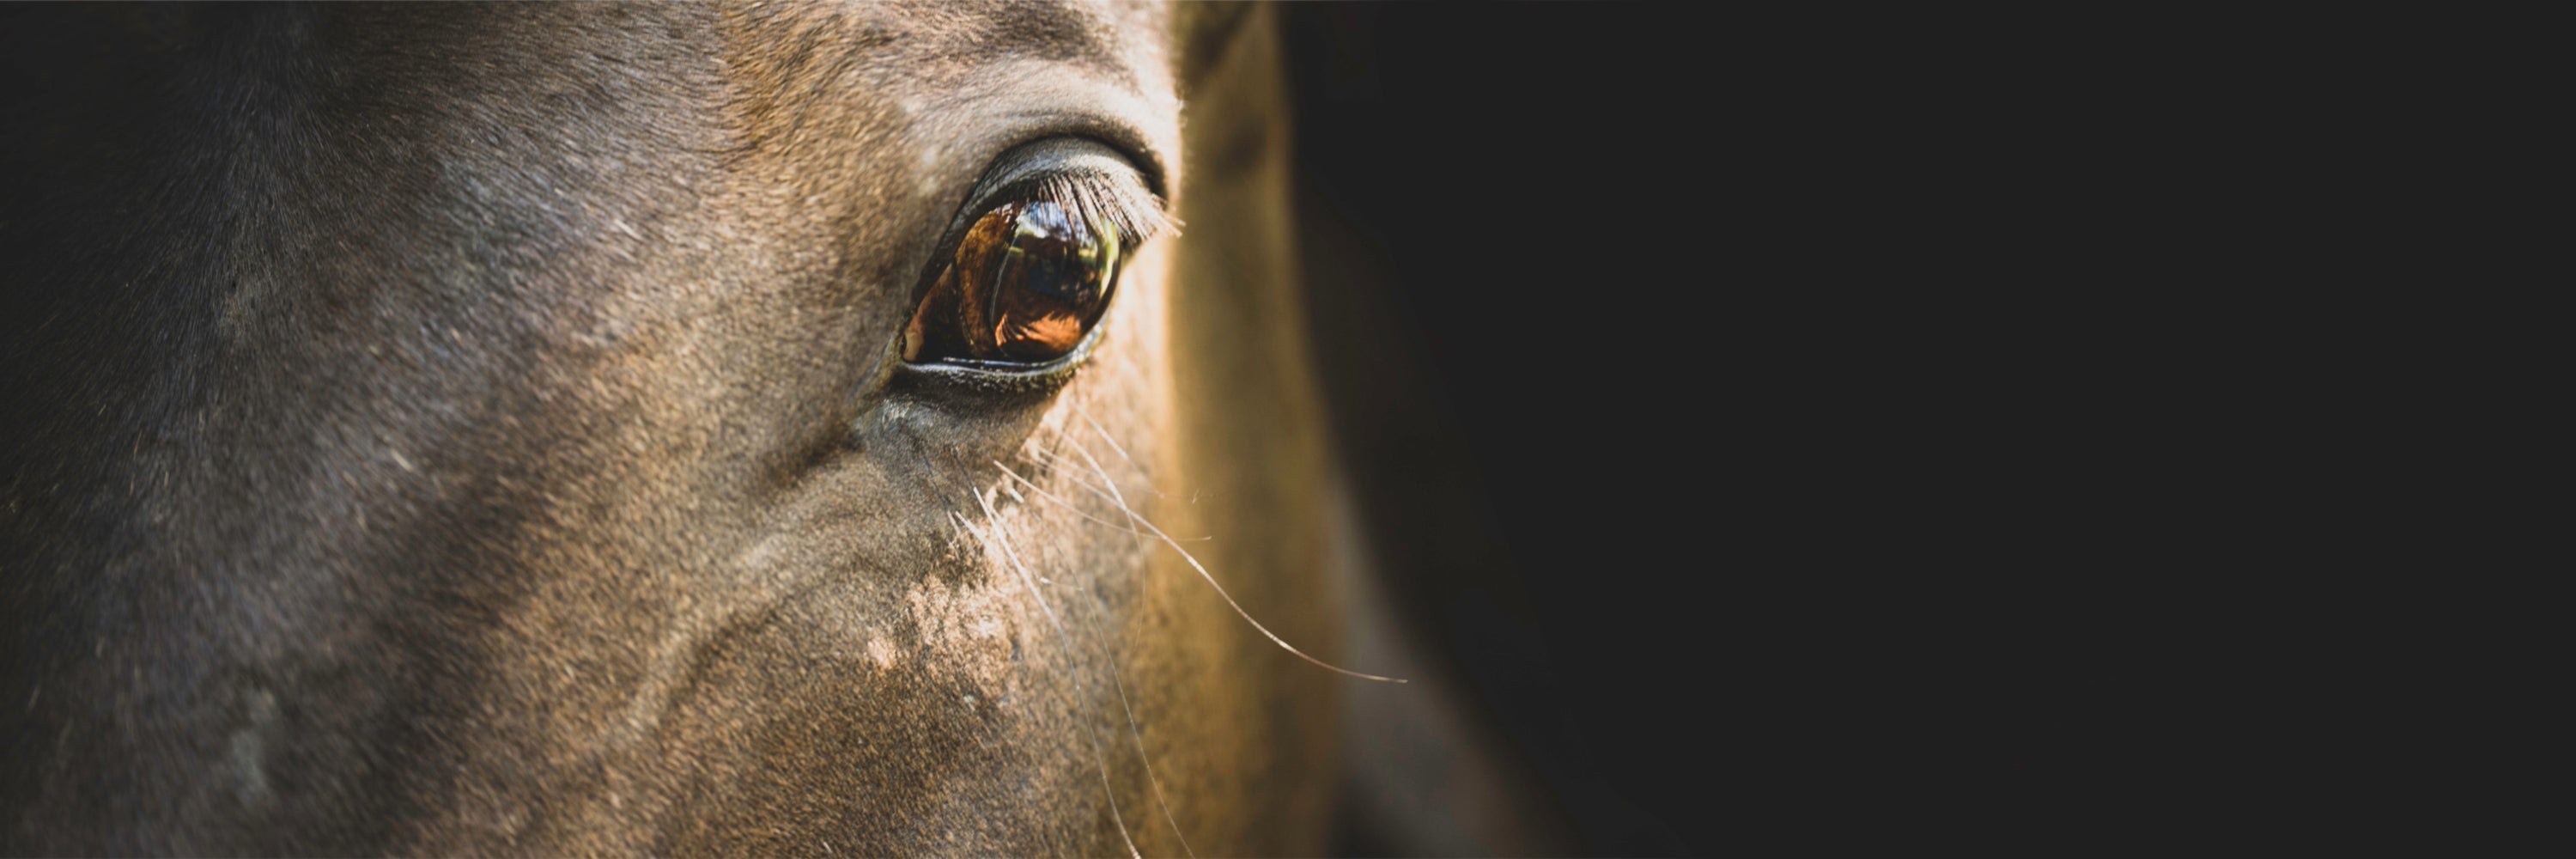 Close-up of horse eye. Calming Supplements for Horses	Equine Calming Supplements, Horse Calming Supplement